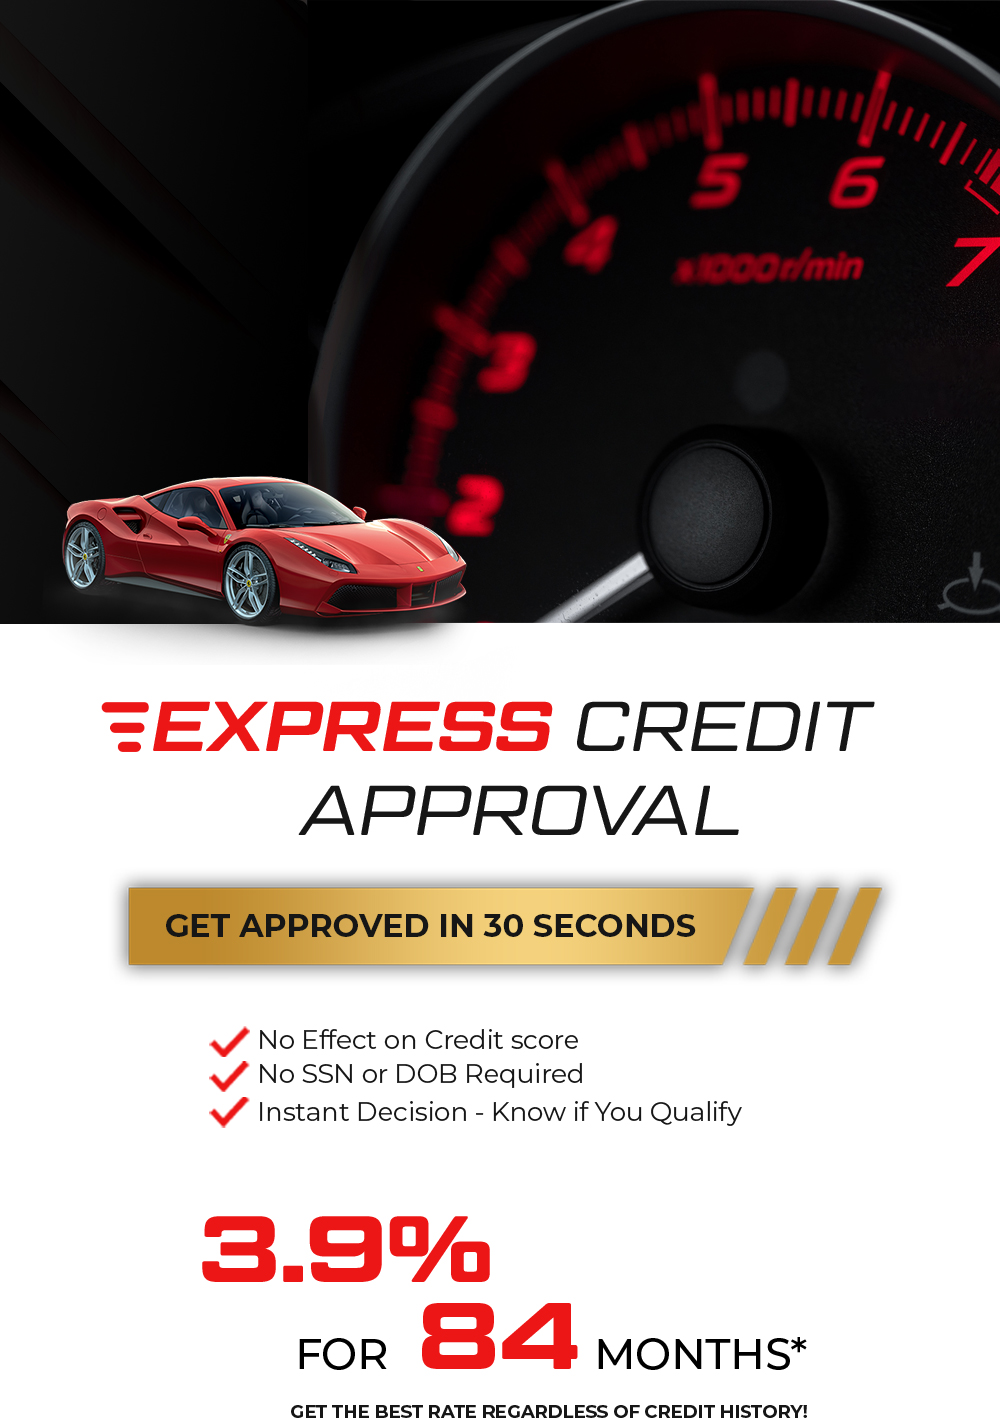 Express Credit Approval